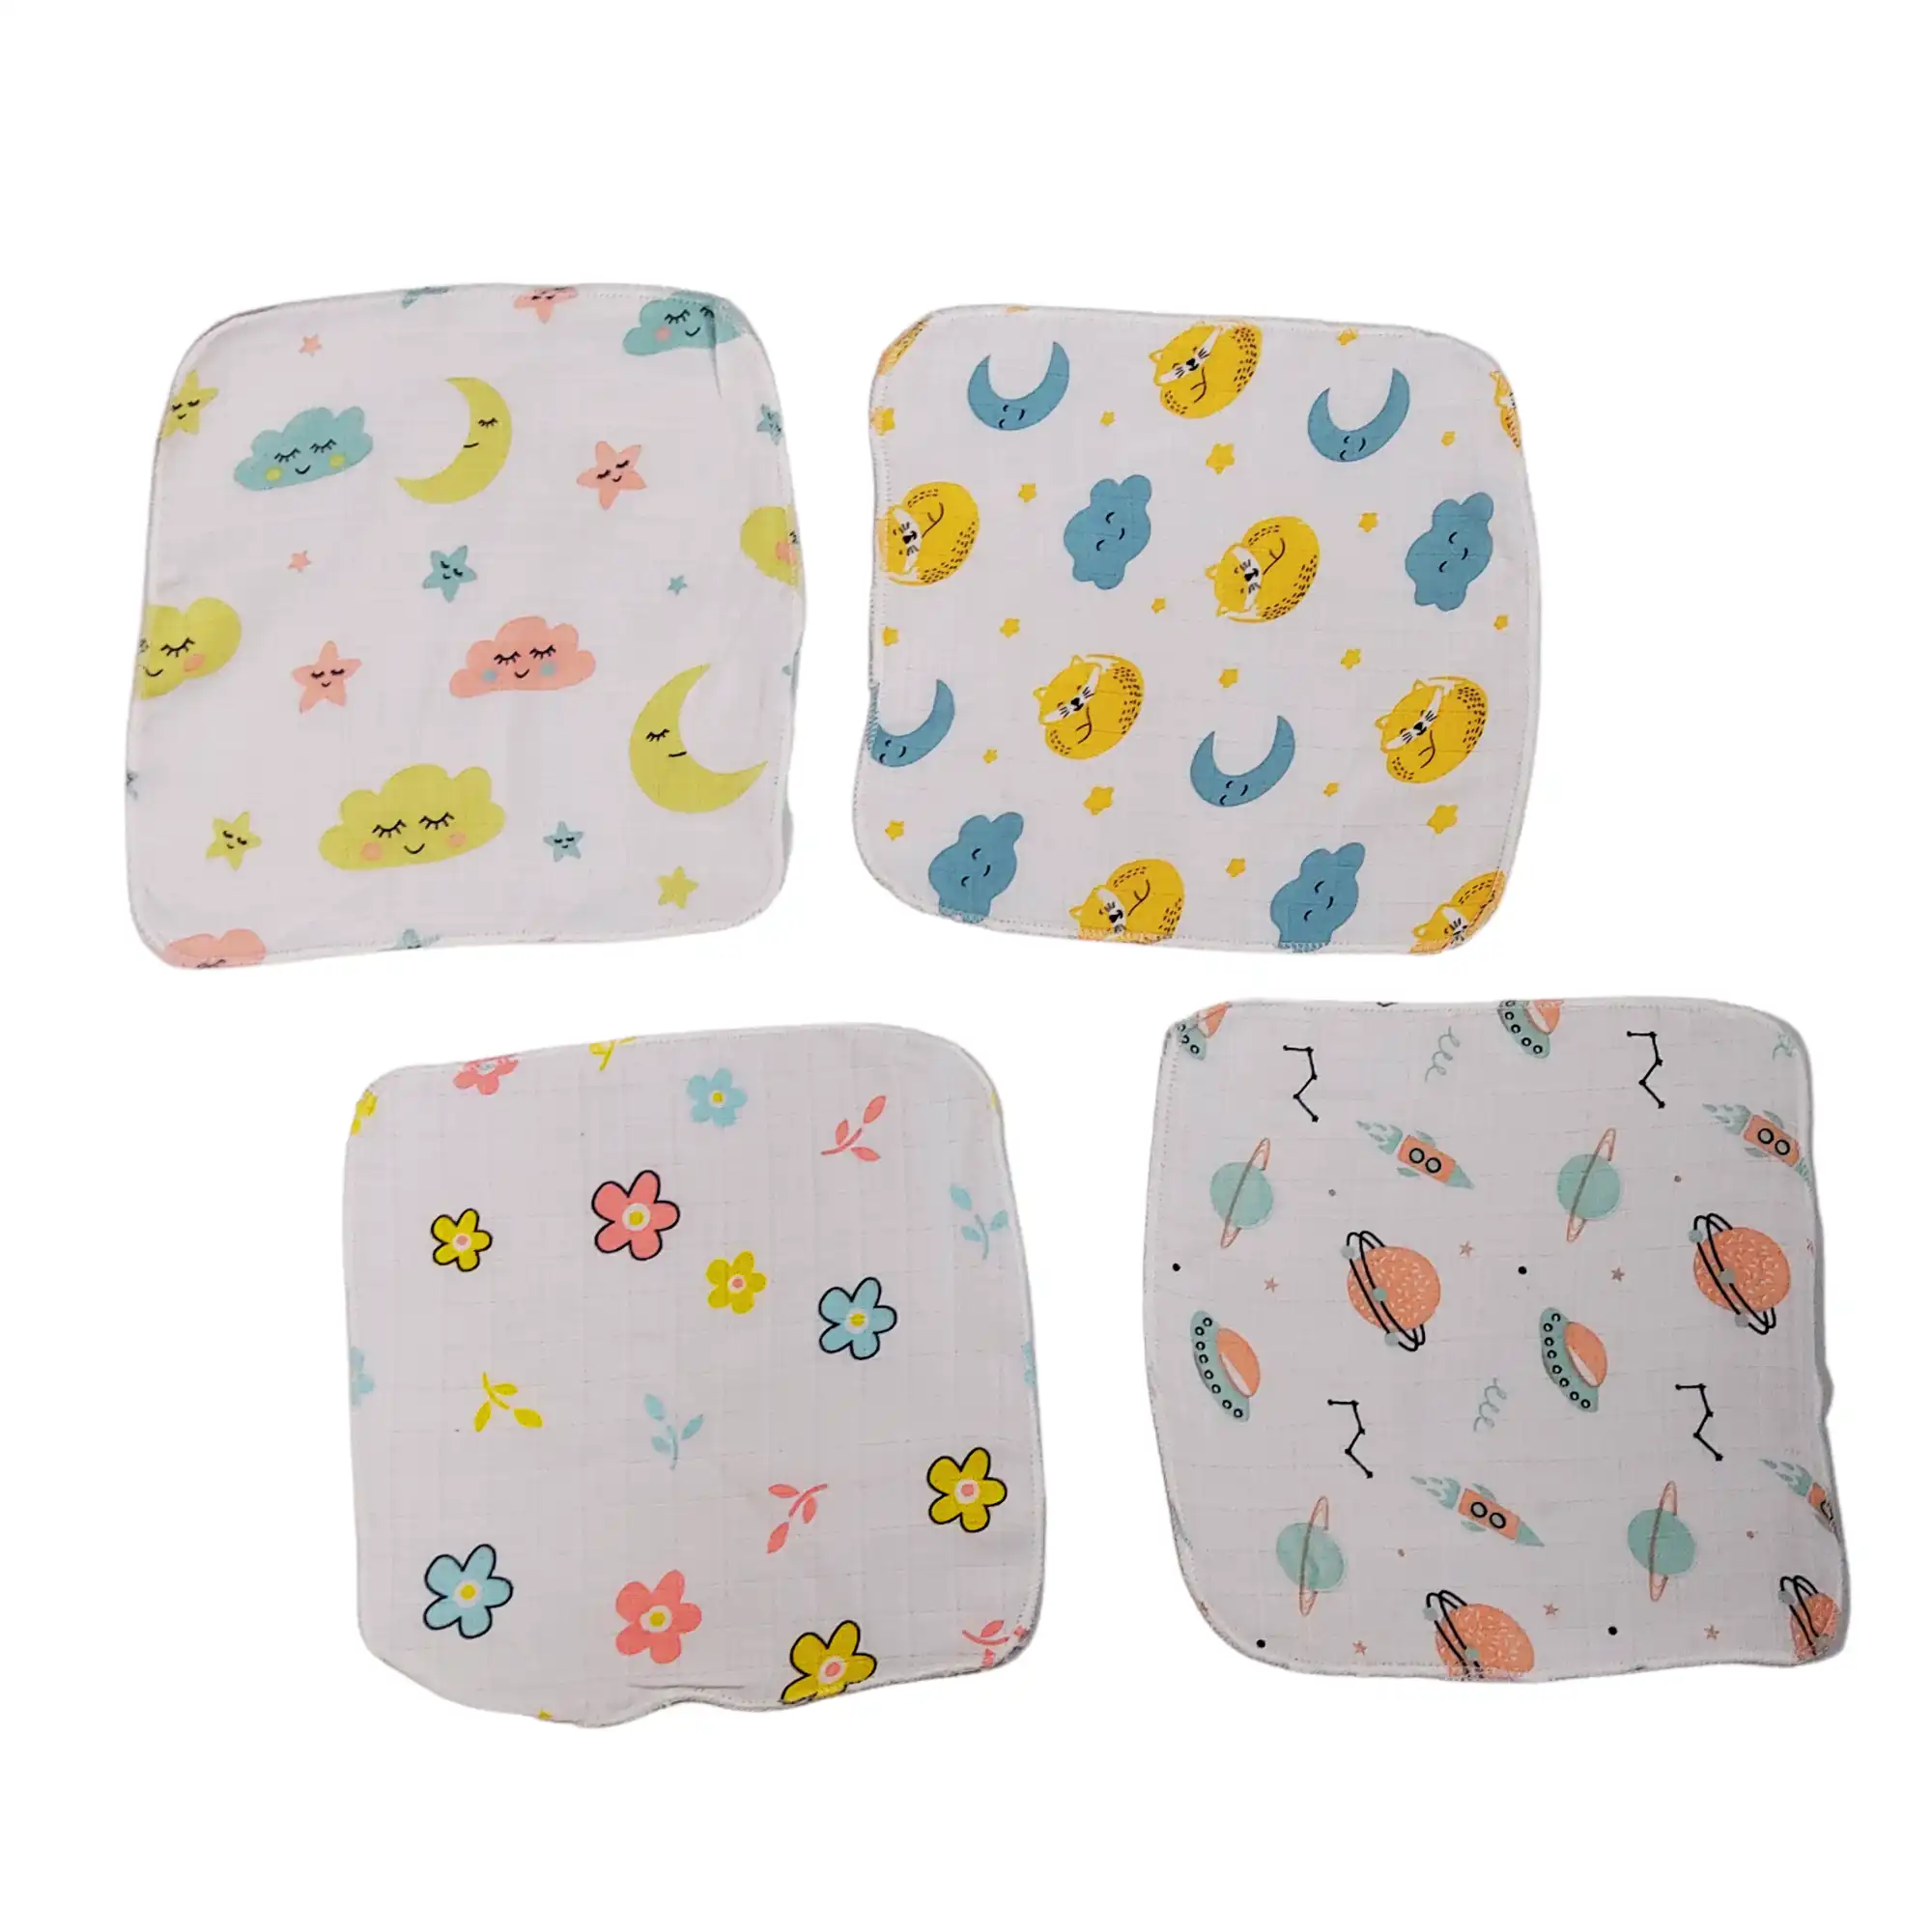 Love Baby Thin abstract printed ultra soft double layer muslin washcloth set – WCL42 Combo P5 4